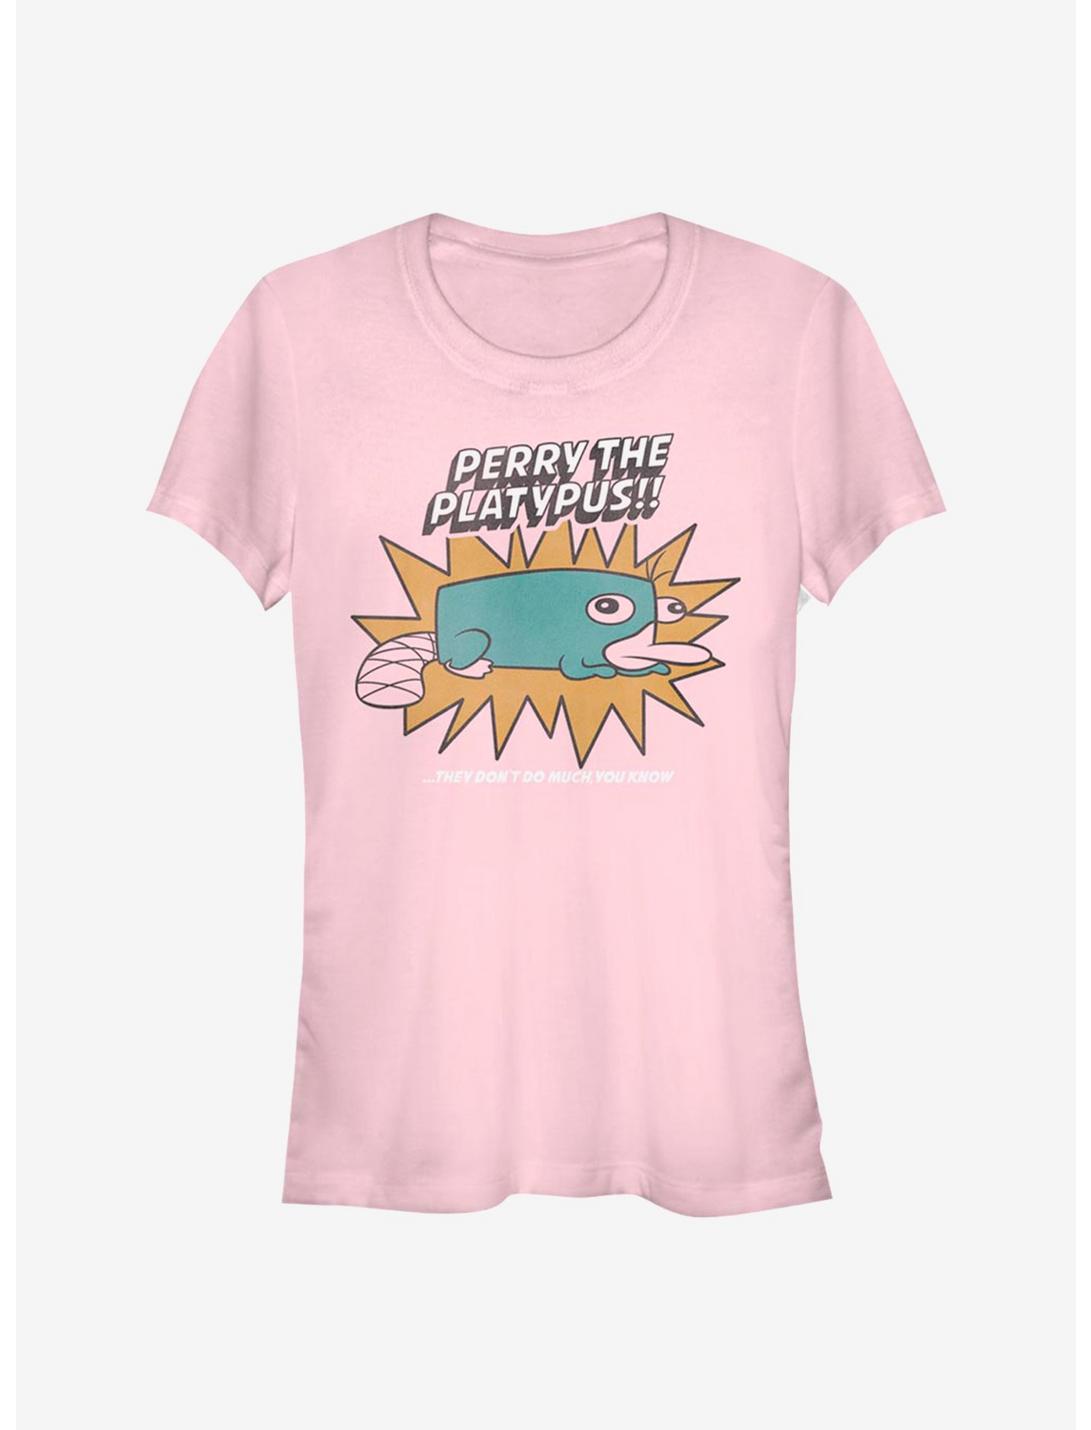 Disney Phineas And Ferb Perry The Platypus Girls T-Shirt, LIGHT PINK, hi-res